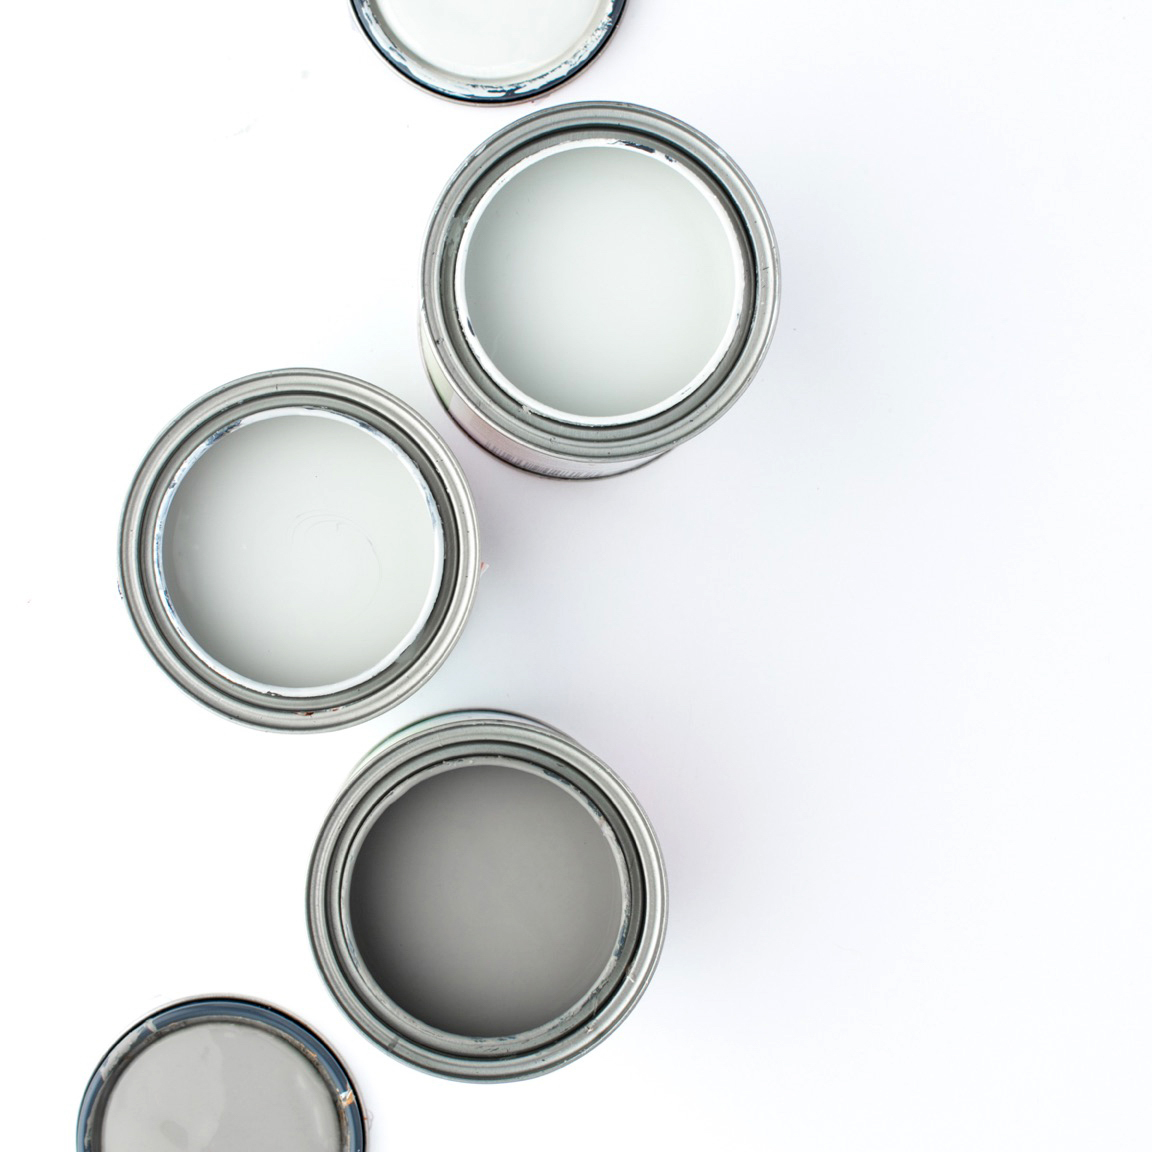 image of open paint cans with three shades of grey paint